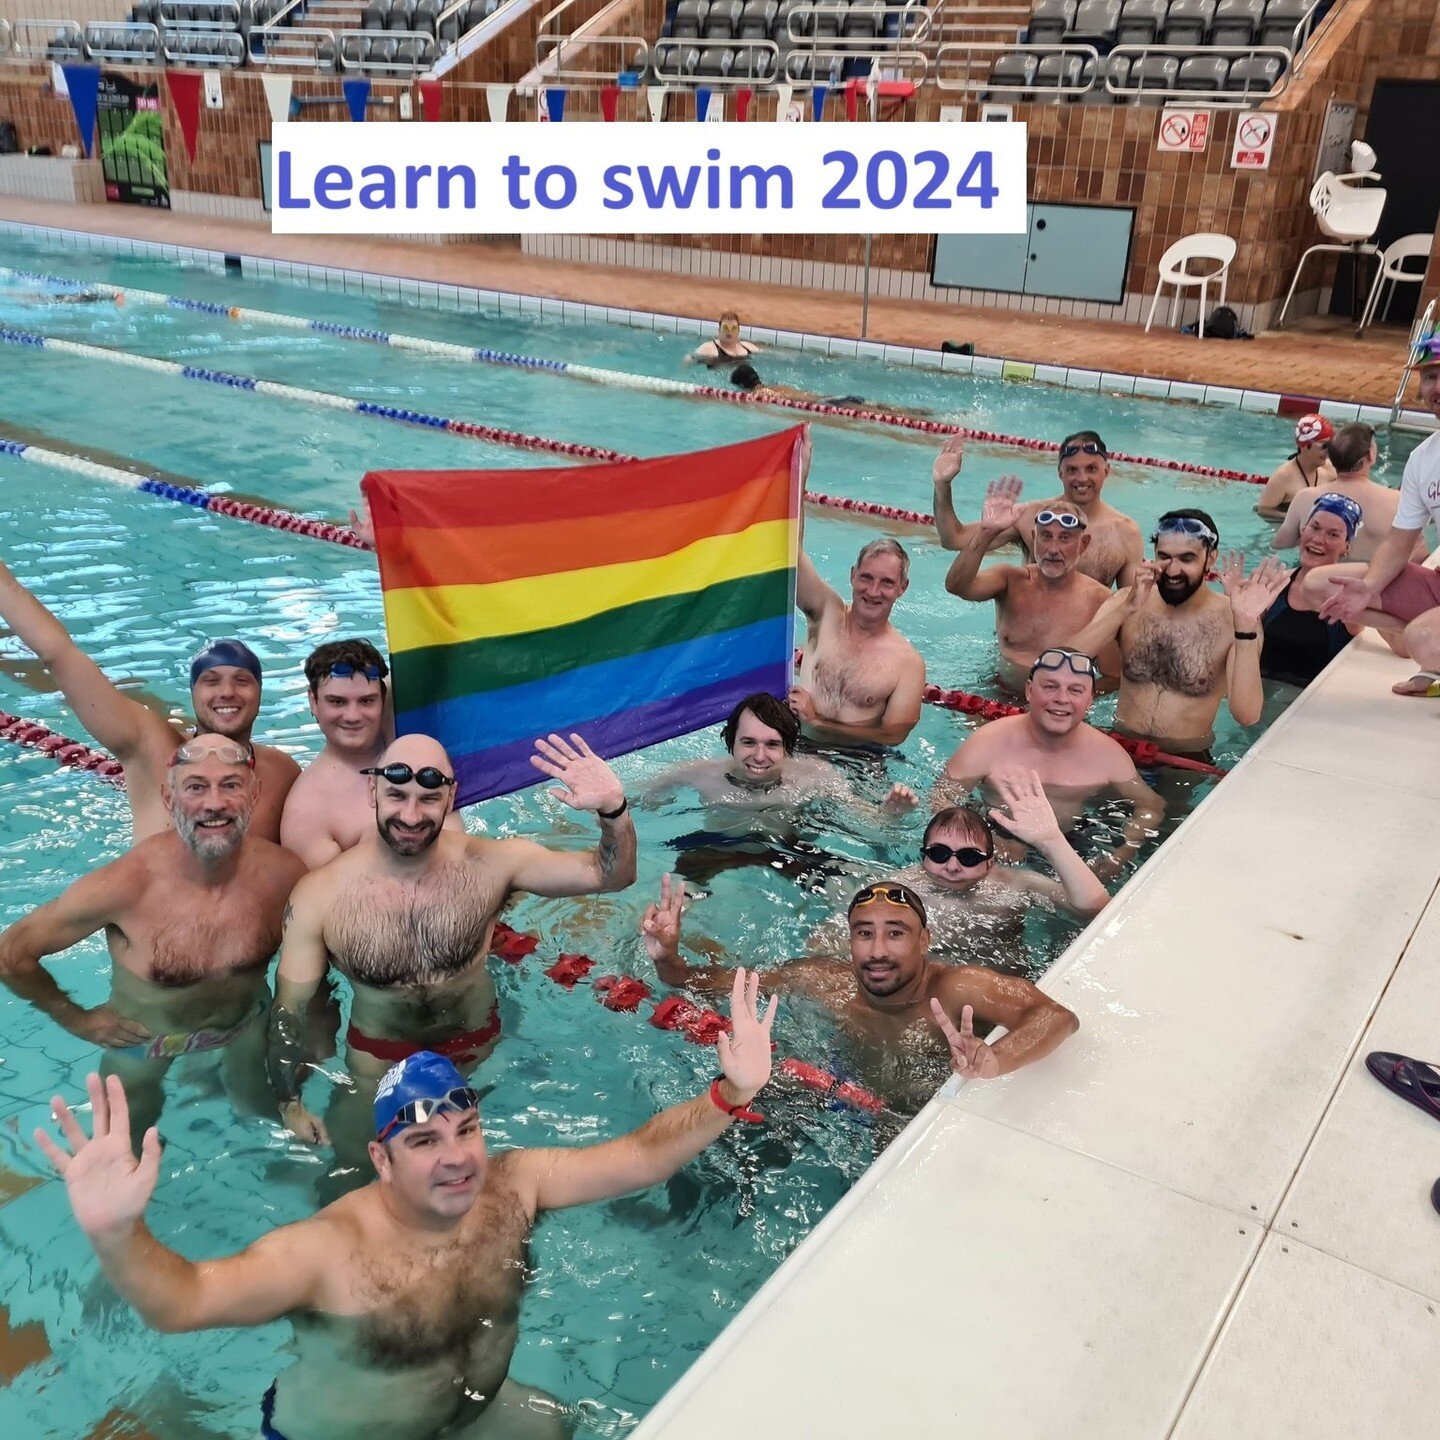 Learn to swim 2024. As part of our plan to encourage a wider range of swimmers we are re-introducing swimming lessons
in 2024.
Lessons will be held at the King Alfred Swimming Pool on Saturdays between 17.00 and 18.00
commencing Saturday 6 th January